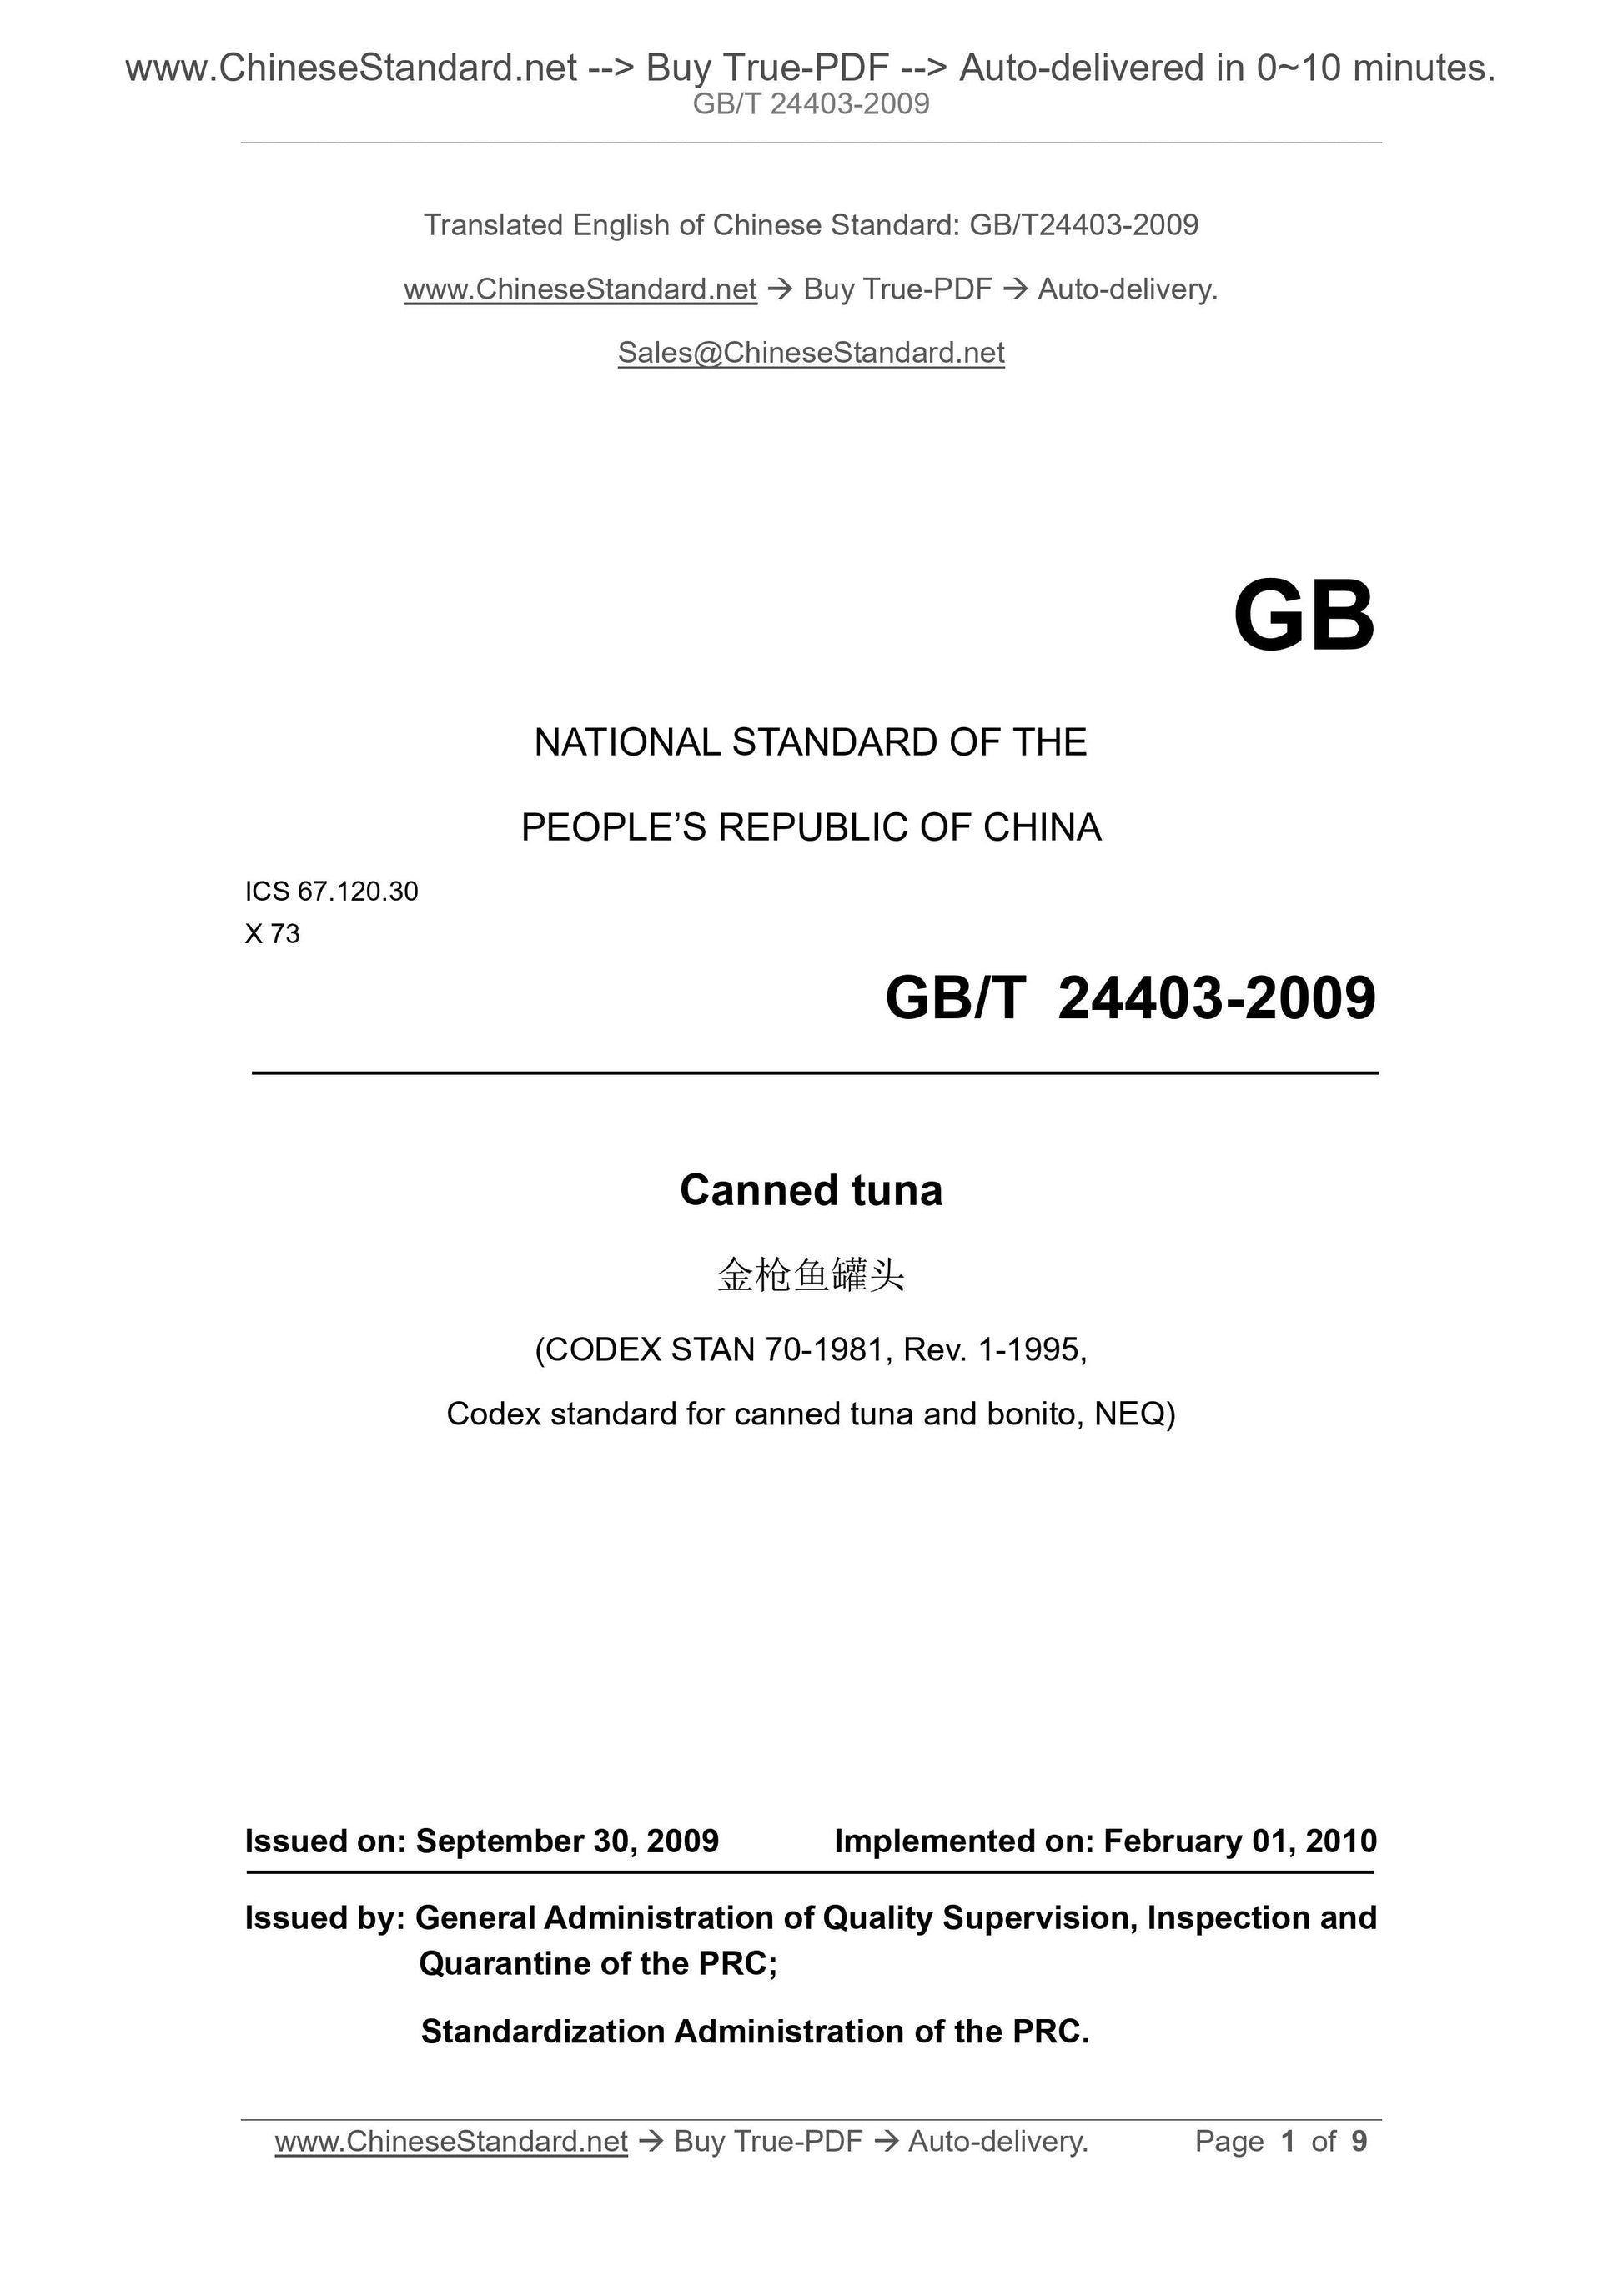 GB/T 24403-2009 Page 1